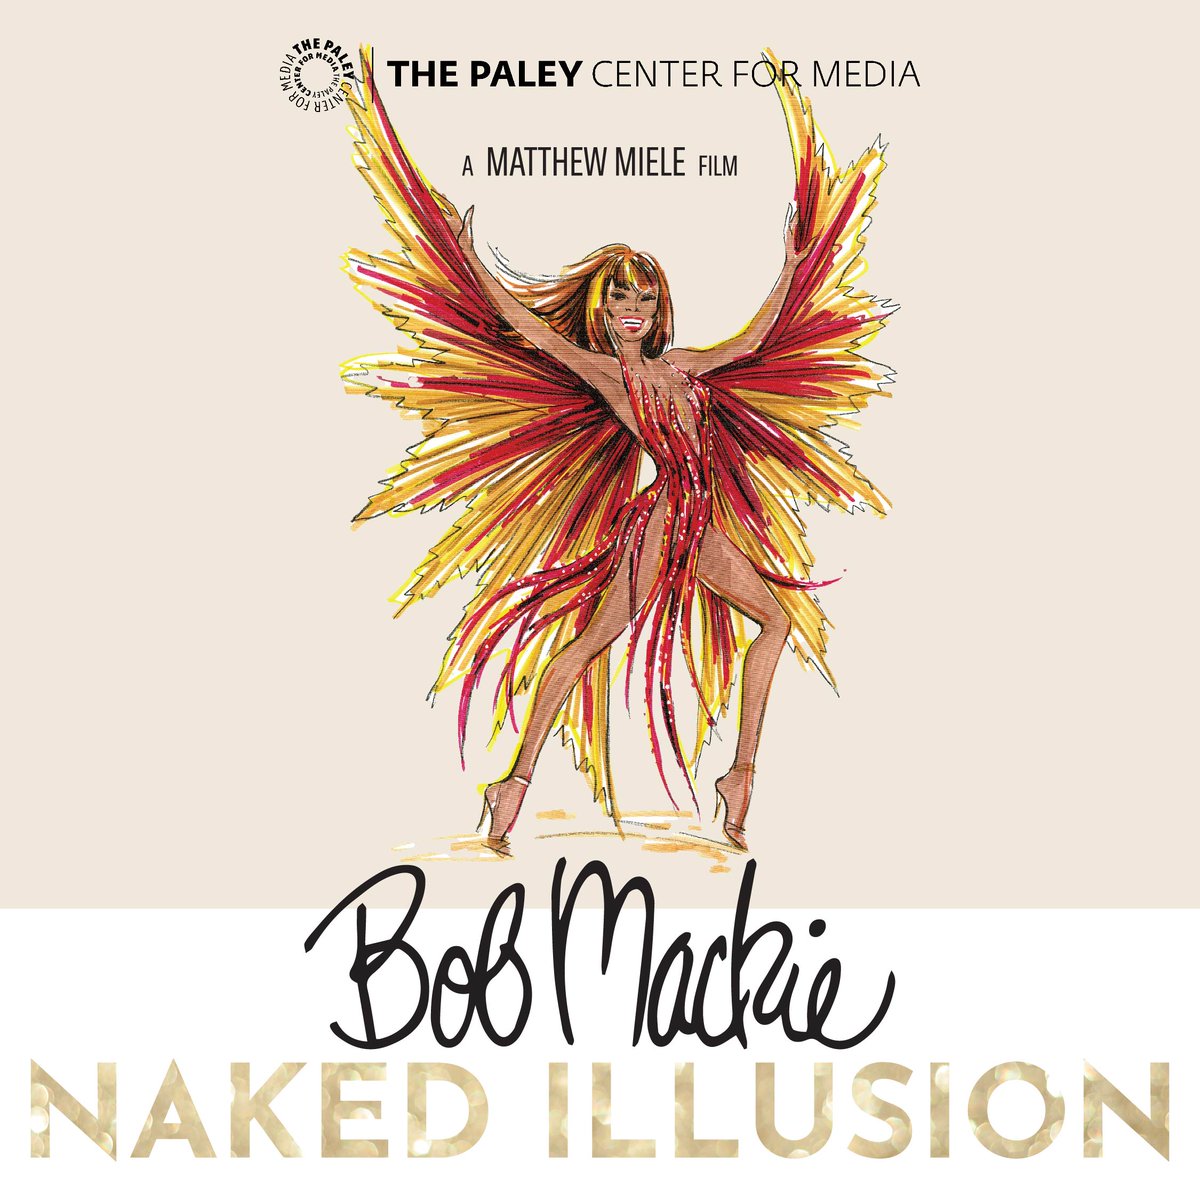 Join us for an unforgettable evening with legends Bob Mackie, Carol Burnett, RuPaul, Cher, and more. Patron Circle+ members get an exclusive champagne toast to honor Bob Mackie and friends. Click the link for details: bit.ly/4asl0aN #PaleyLive